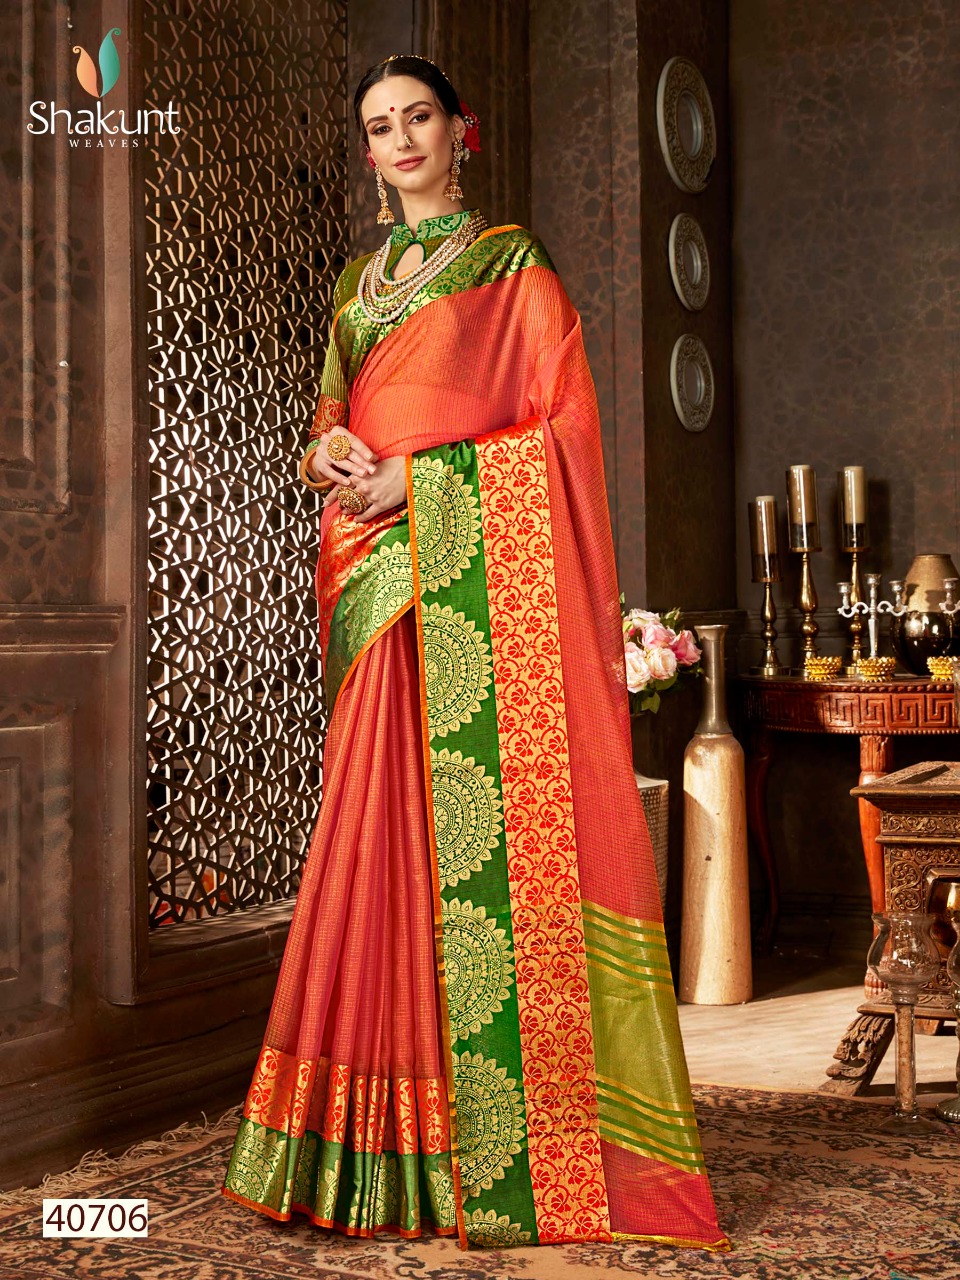 Shakunt weaves sumangal 3 Traditional sarees collection